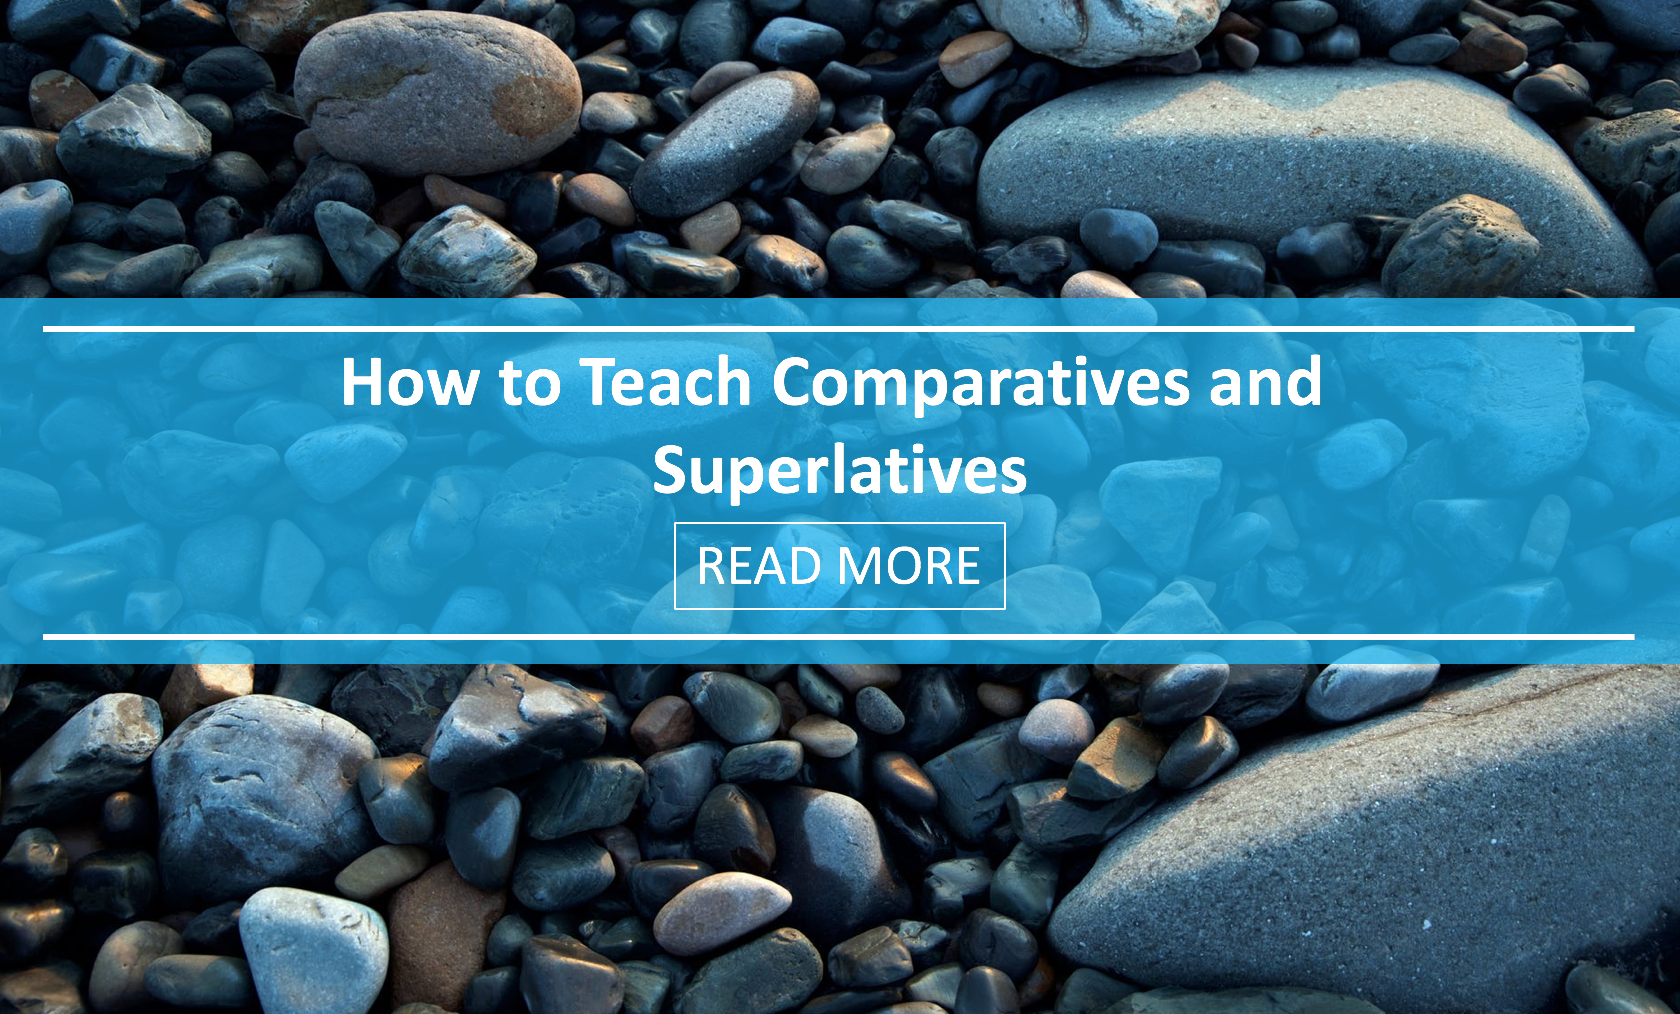 How to Teach Comparatives and Superlatives